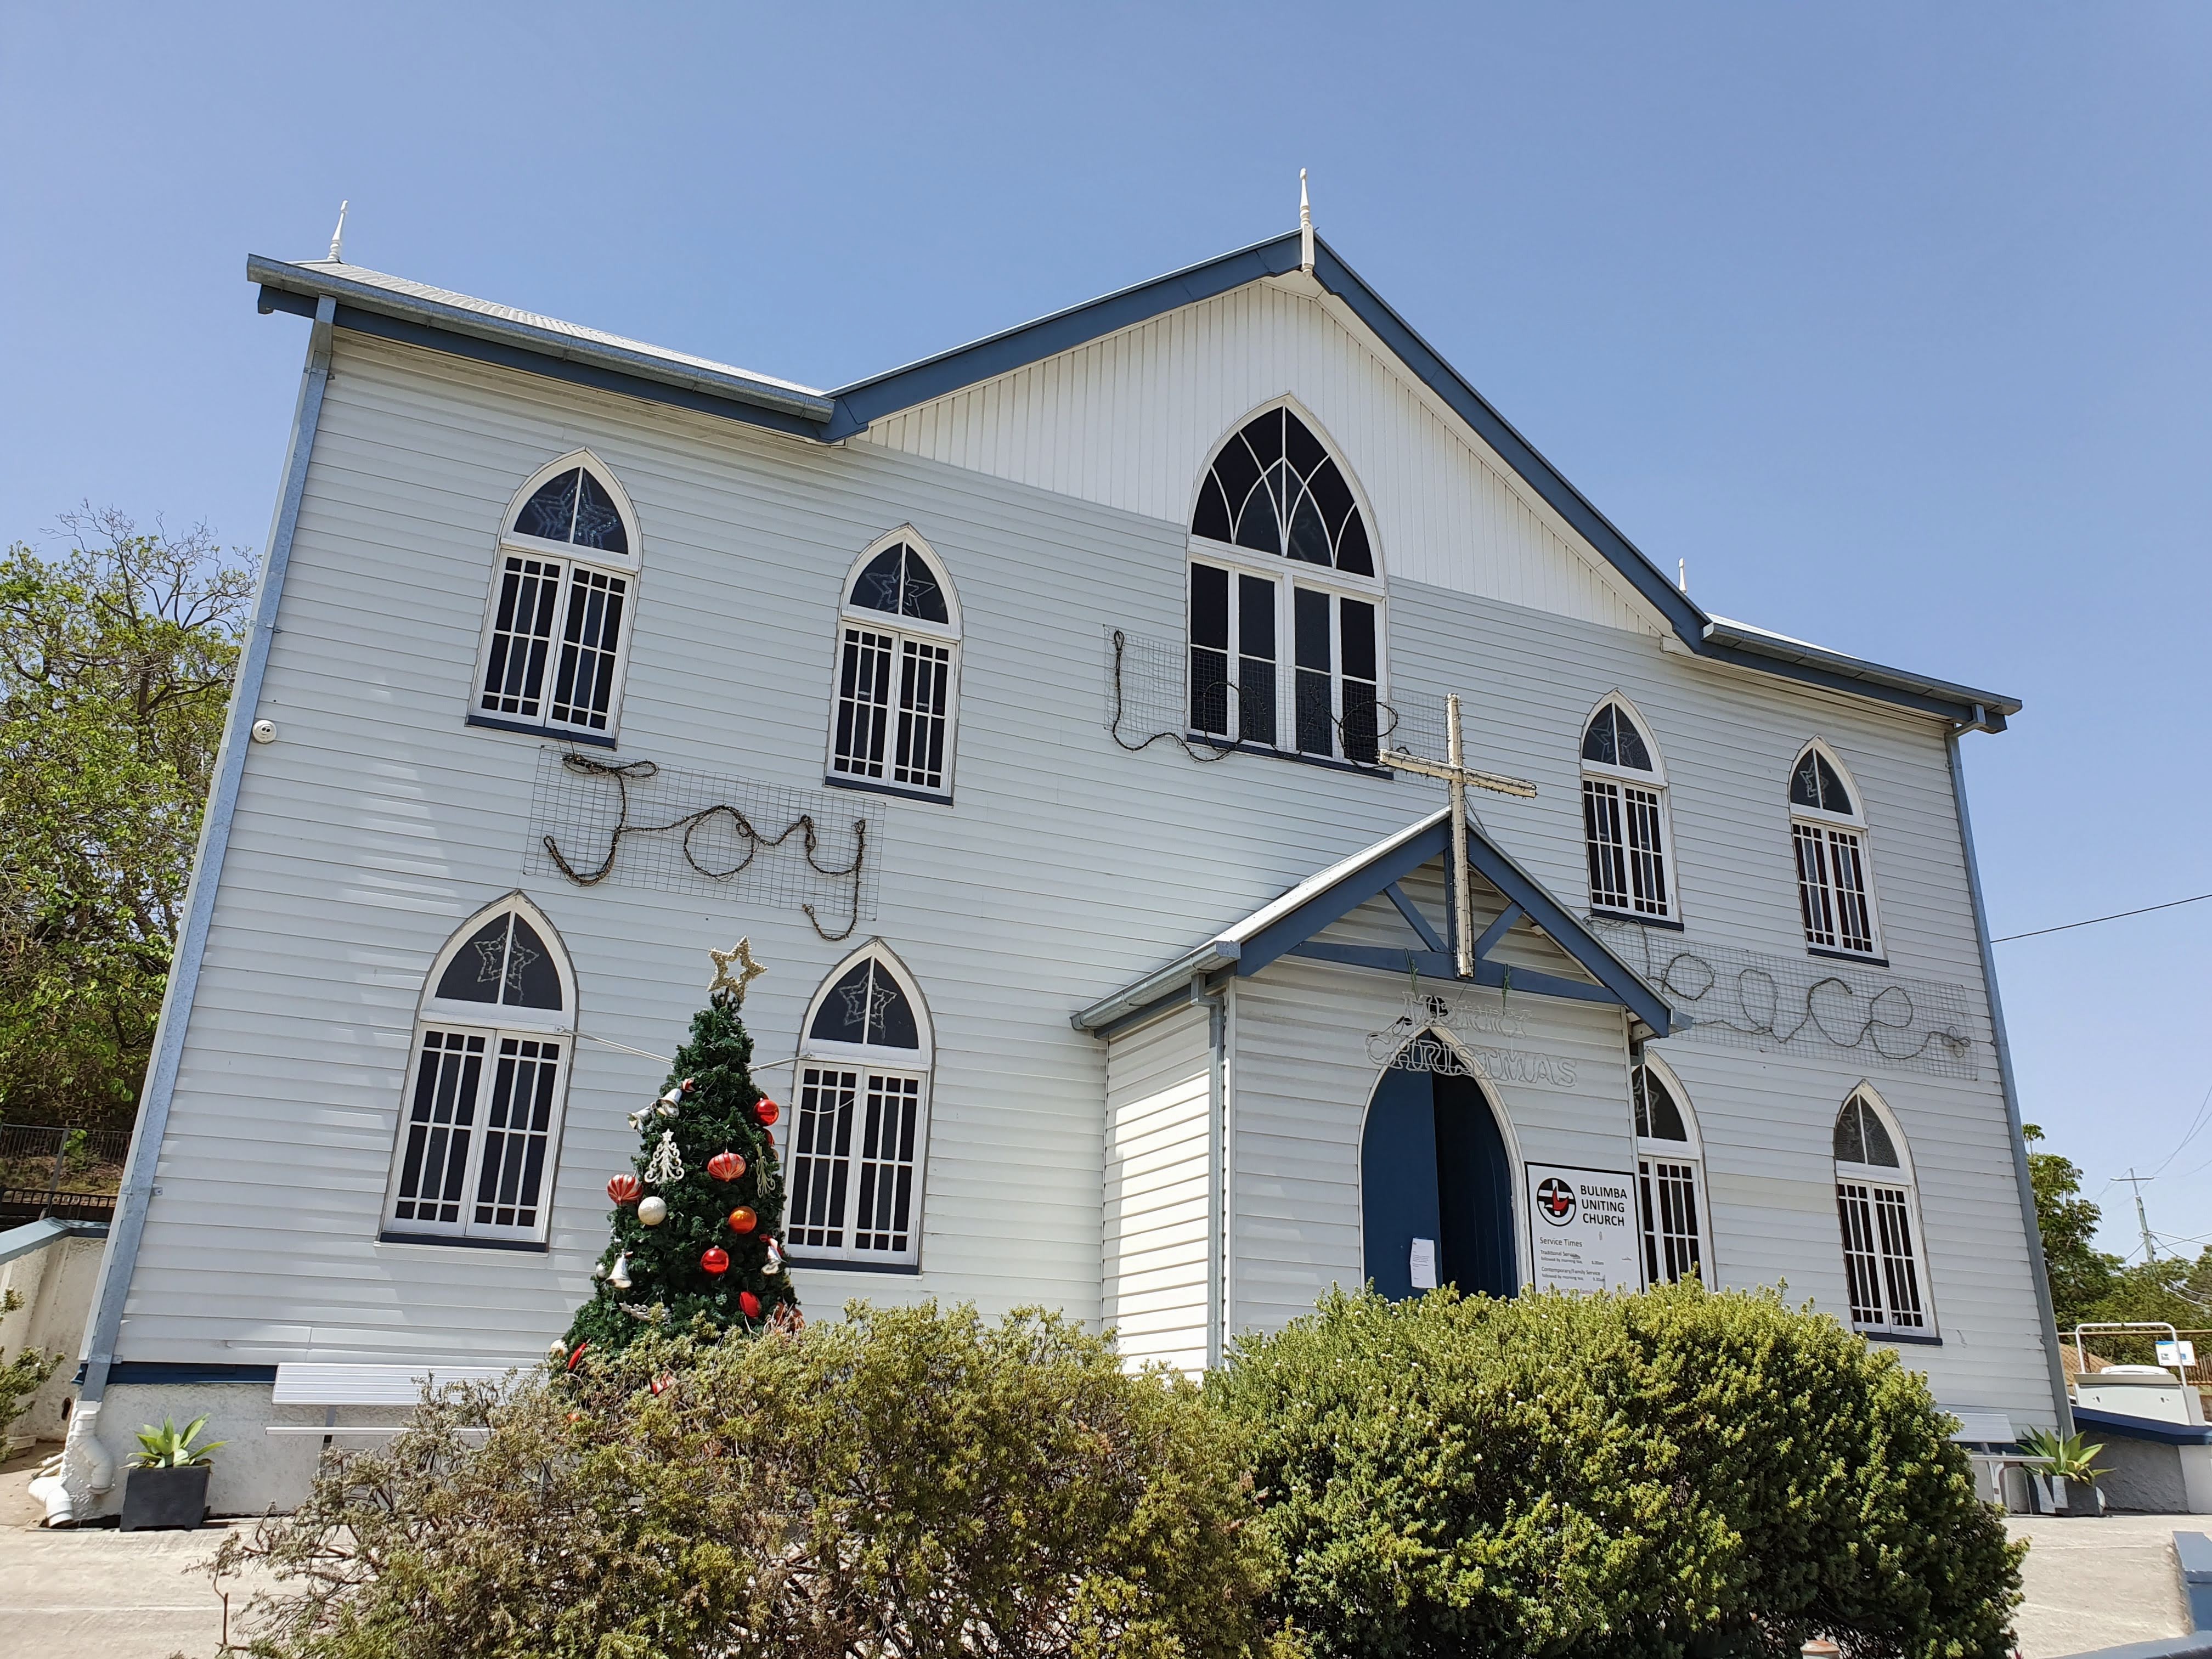 This is an image of the local heritage place known as Bulimba Uniting Church viewed from Oxford Street